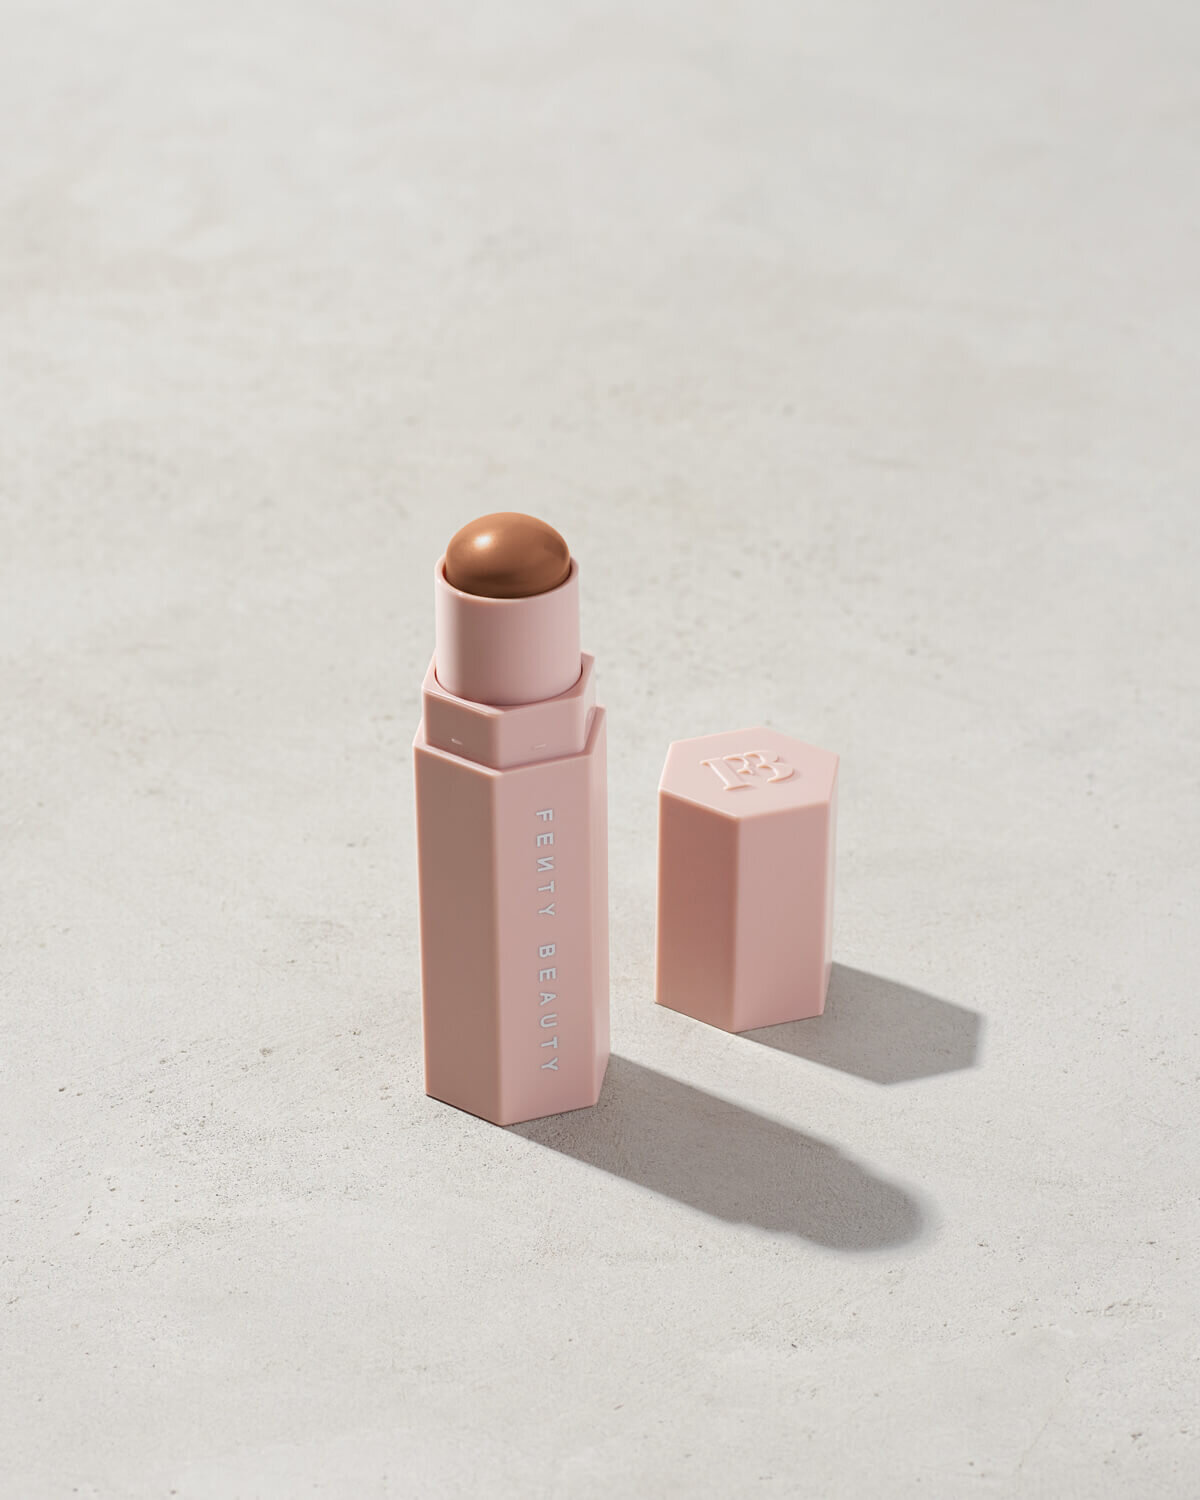 Fenty Beauty Contour in the shade Truffle - Photo Credit: Sephora  The color is described as a deep color with neutral undertones. It’s $25 and the cool part about the product is it’s magnetic so if you buy other match stix, you can create your own set. 